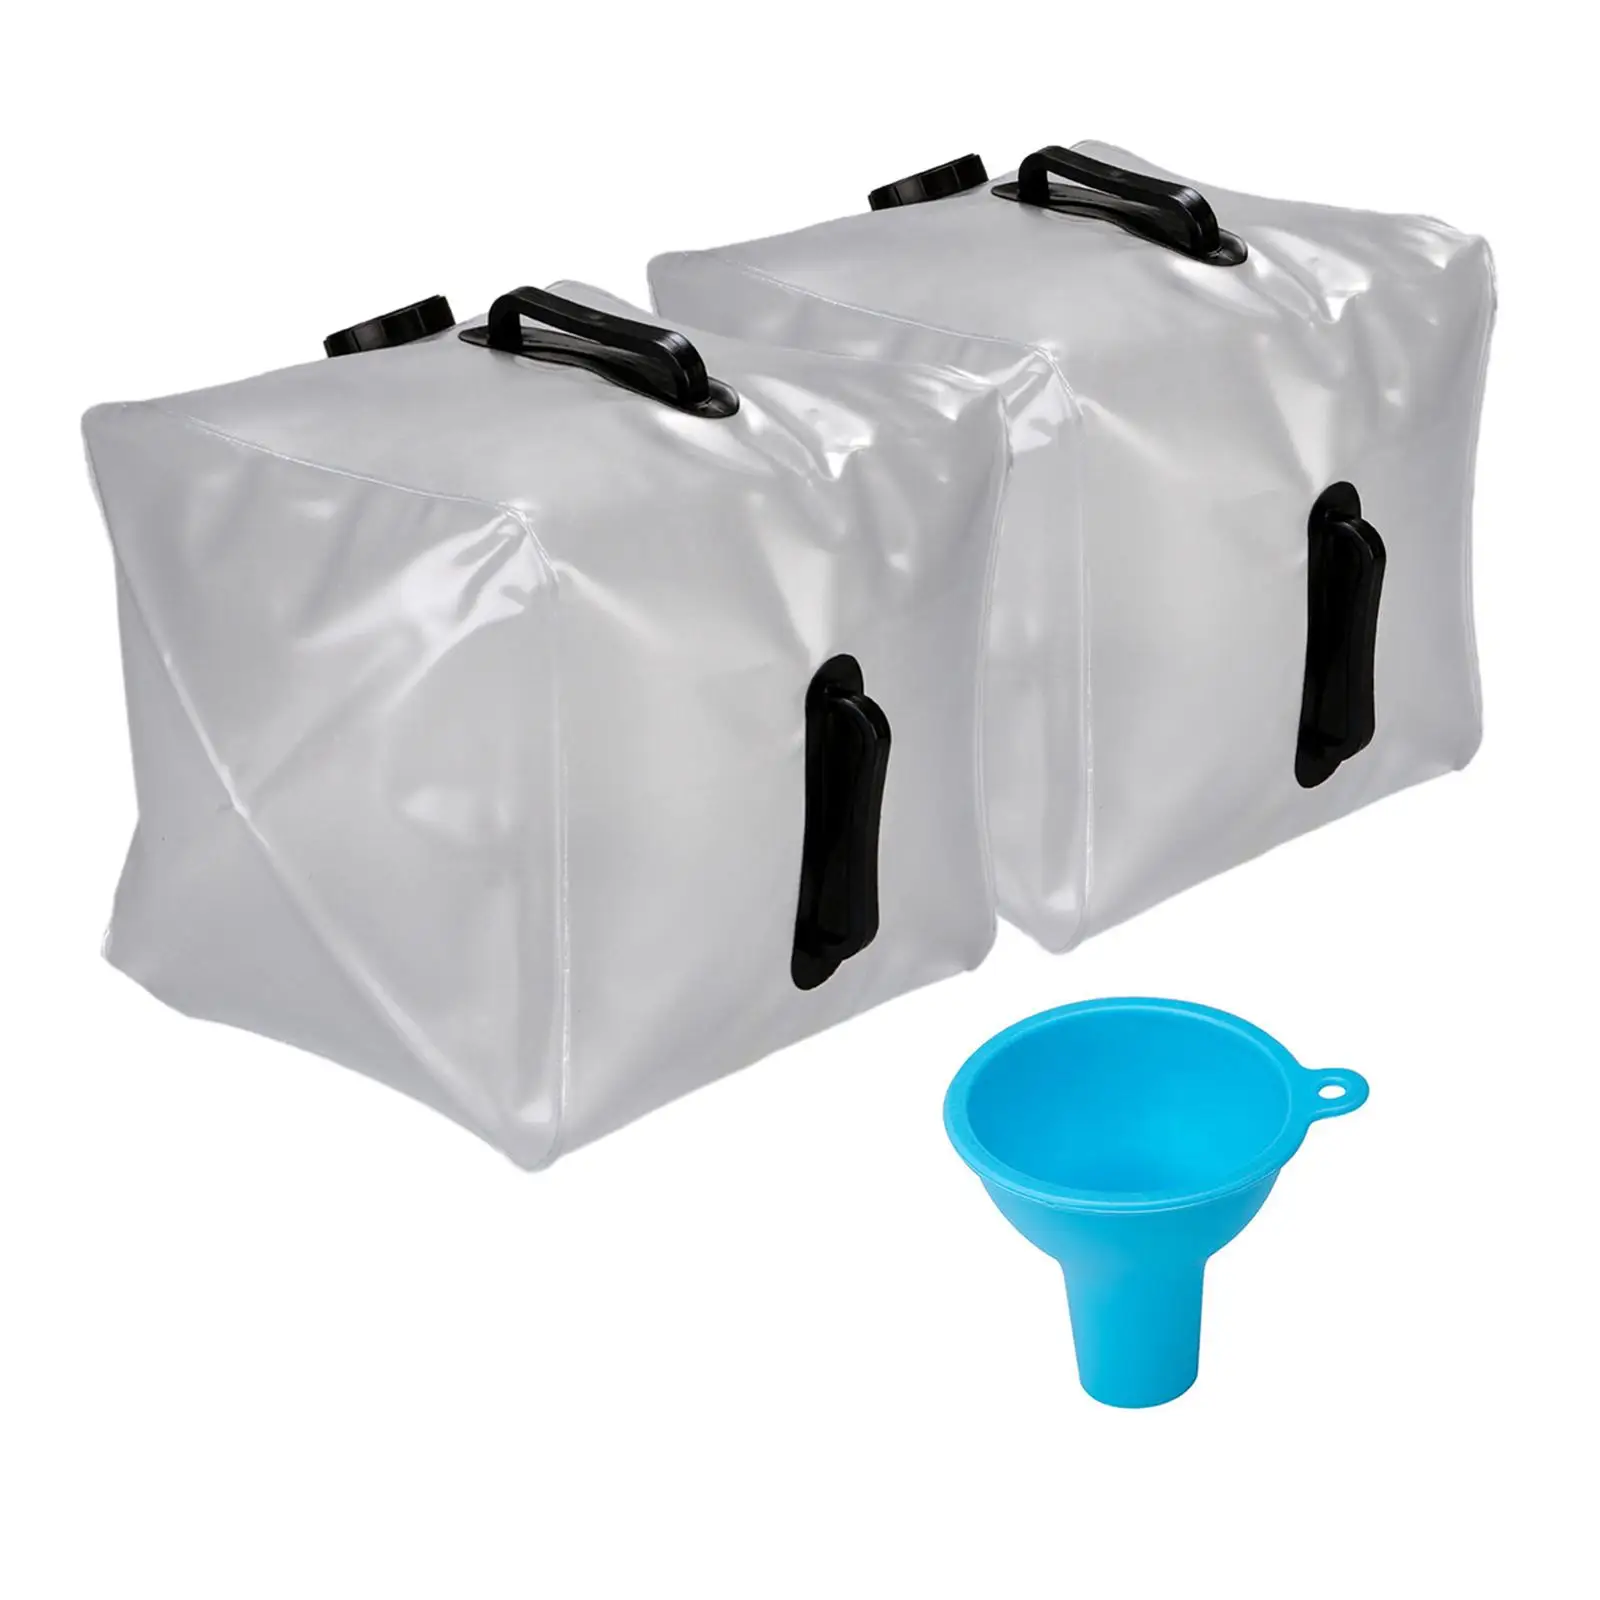 

2 Packs Pool Stairs Weights Bag Pool Step Sandbag Portable Handle Water and Sand Container for above Ground Pool Entry System